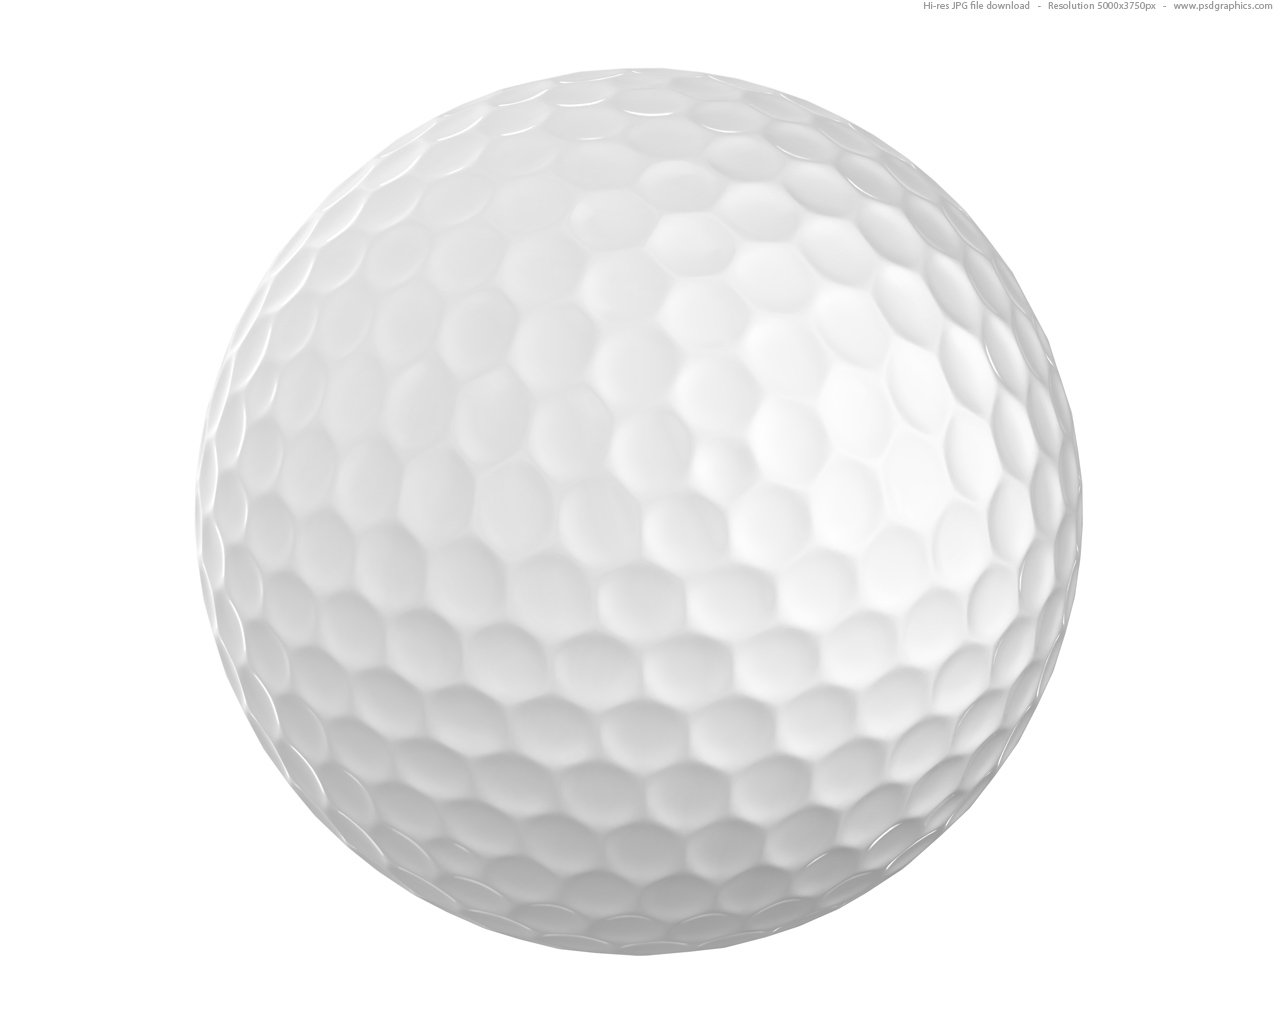 pictures of golf balls clipart - photo #9